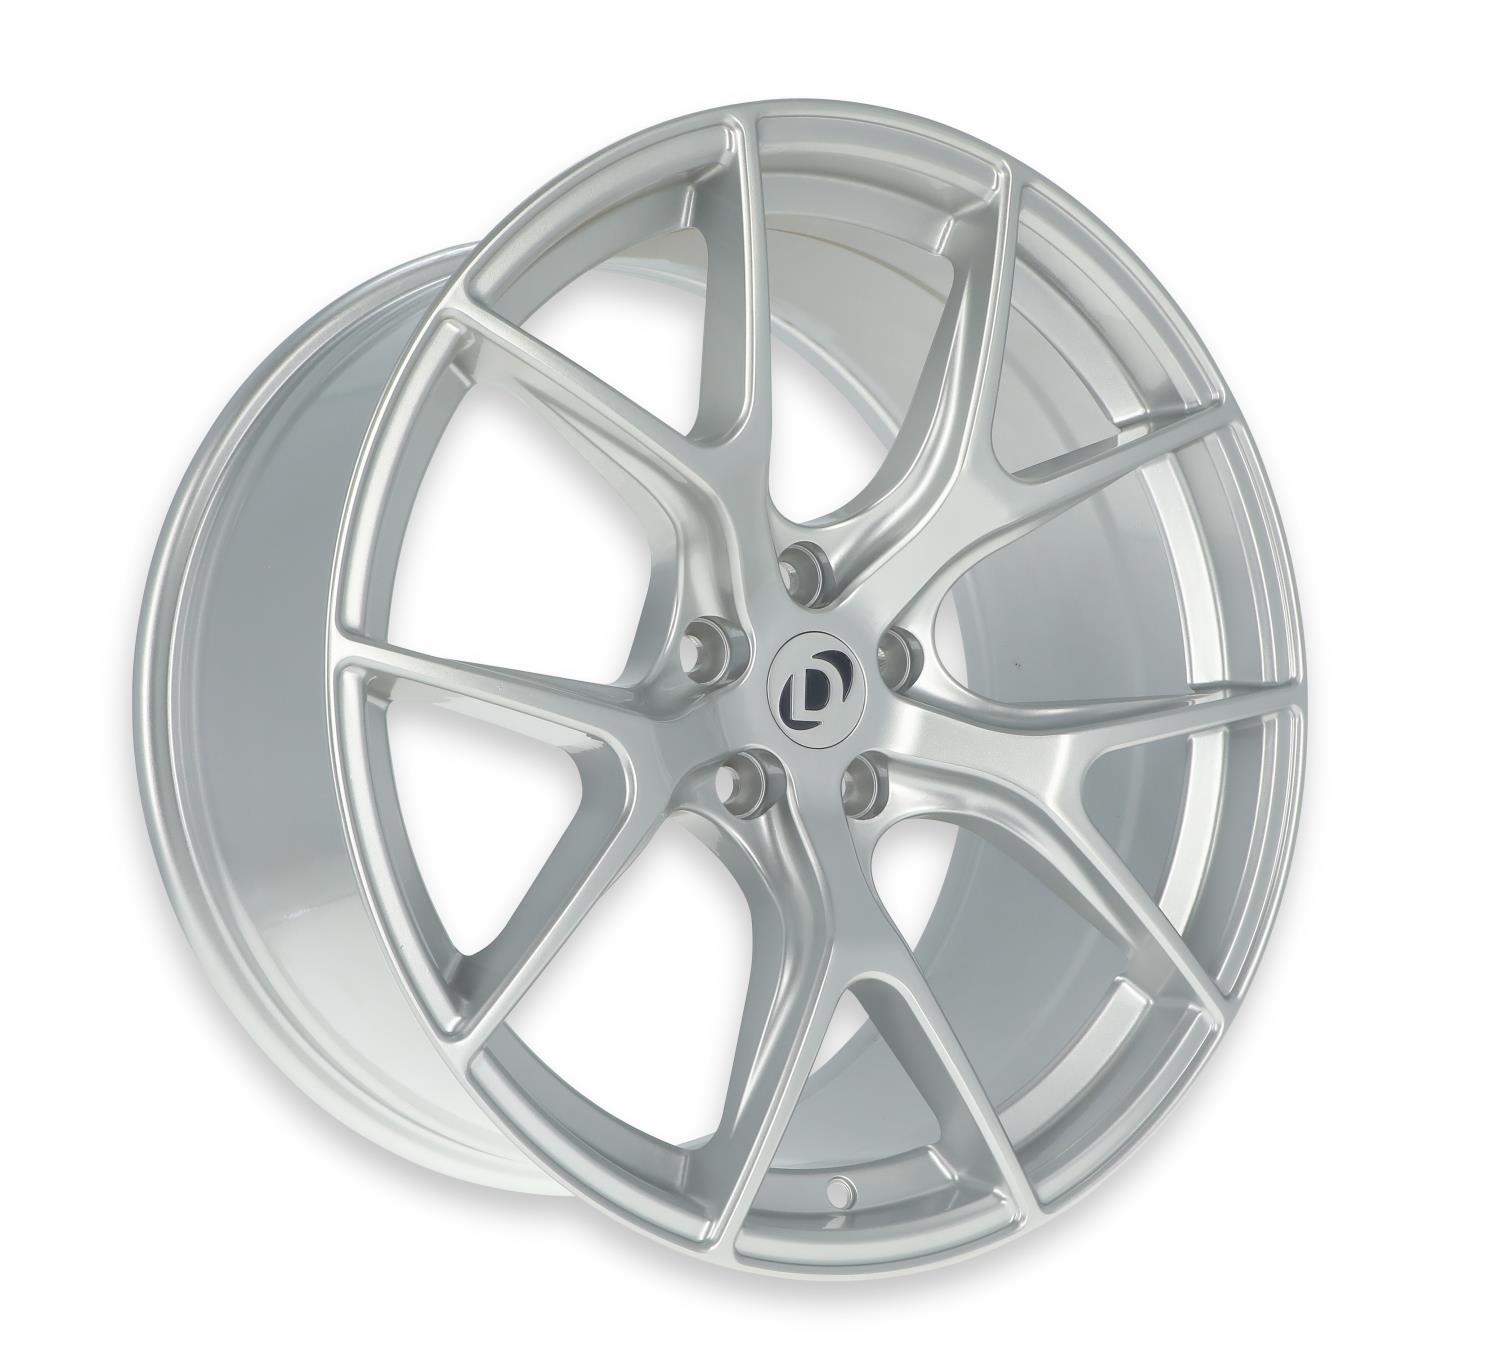 Hyper Kinetic Wheel, Size: 19x8.5", Bolt Pattern: 5x114.3mm, Backspace: 5.93" [Silver Finish with Clearcoat]